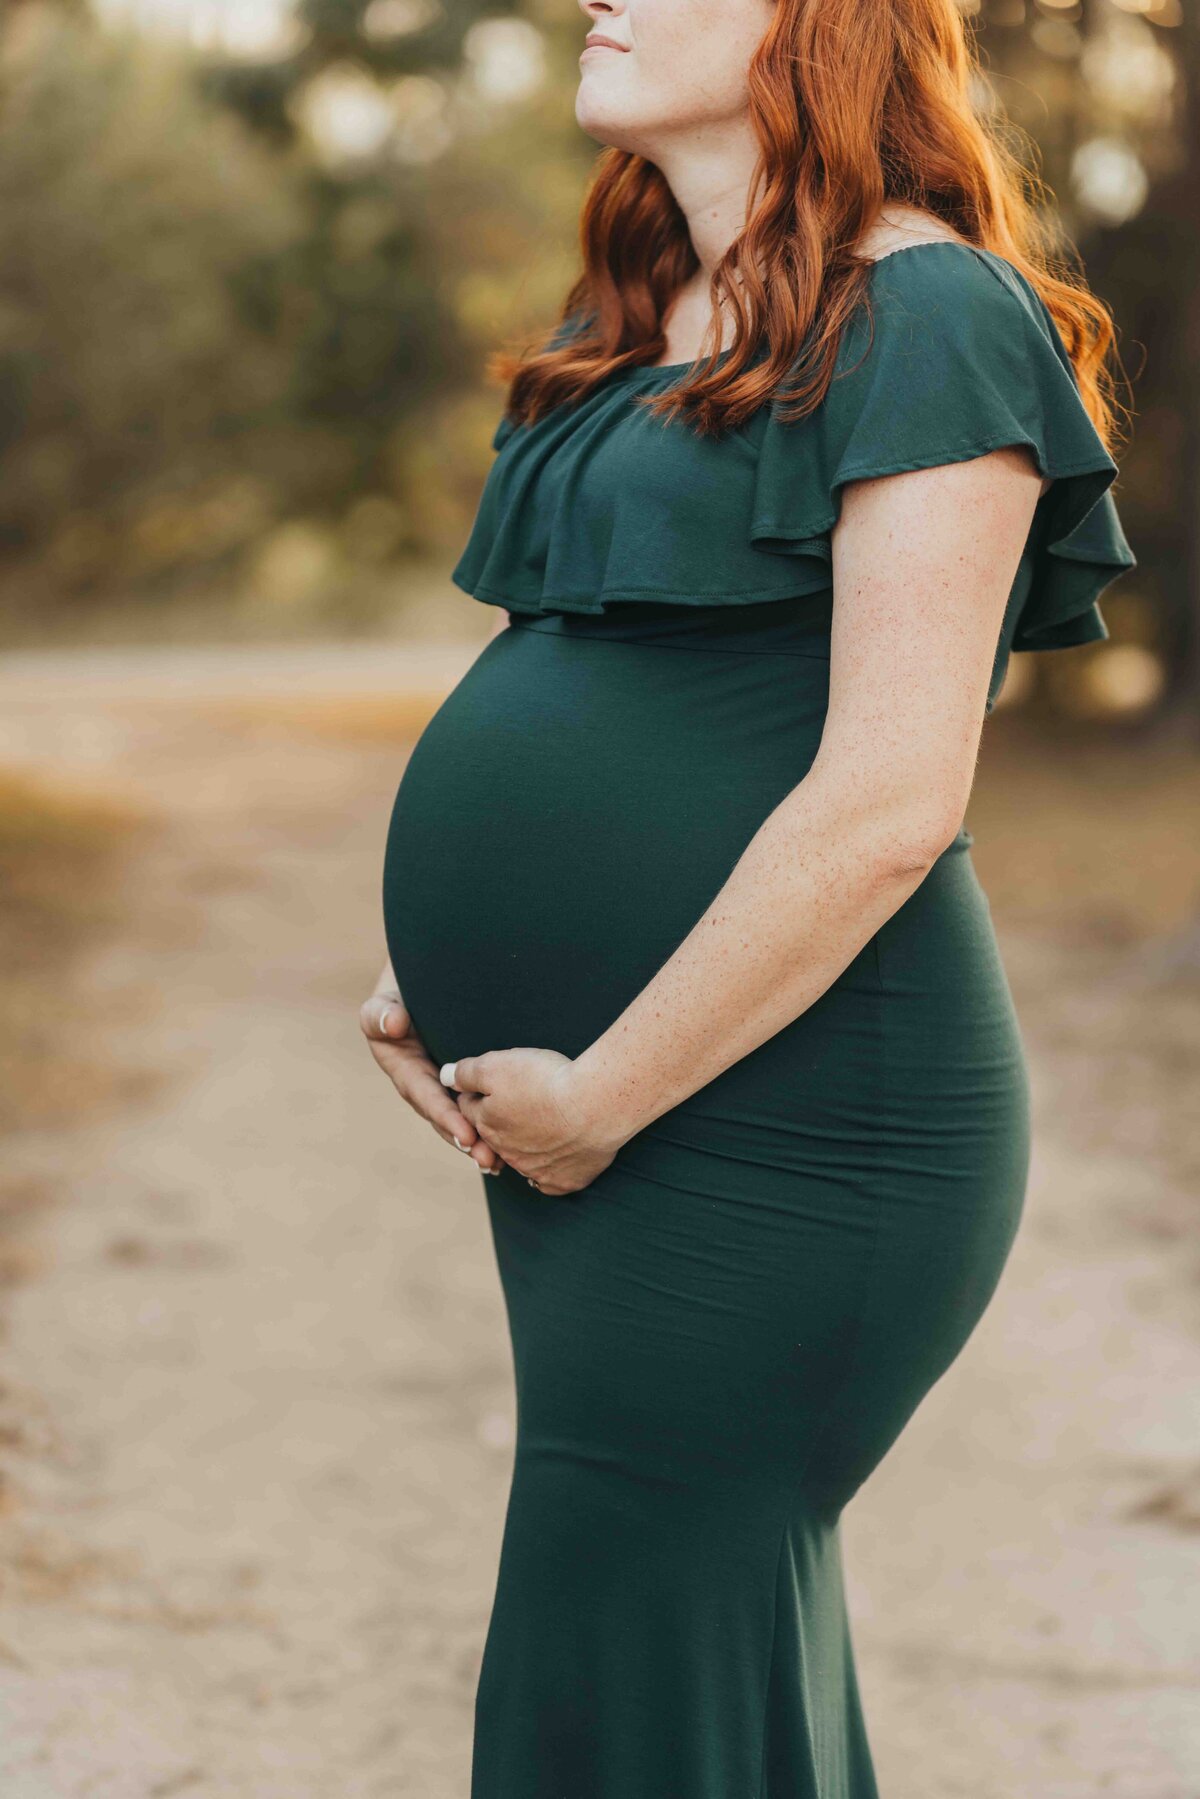 woman with red hair holds her belly, wearing a hunter green maternity gown.